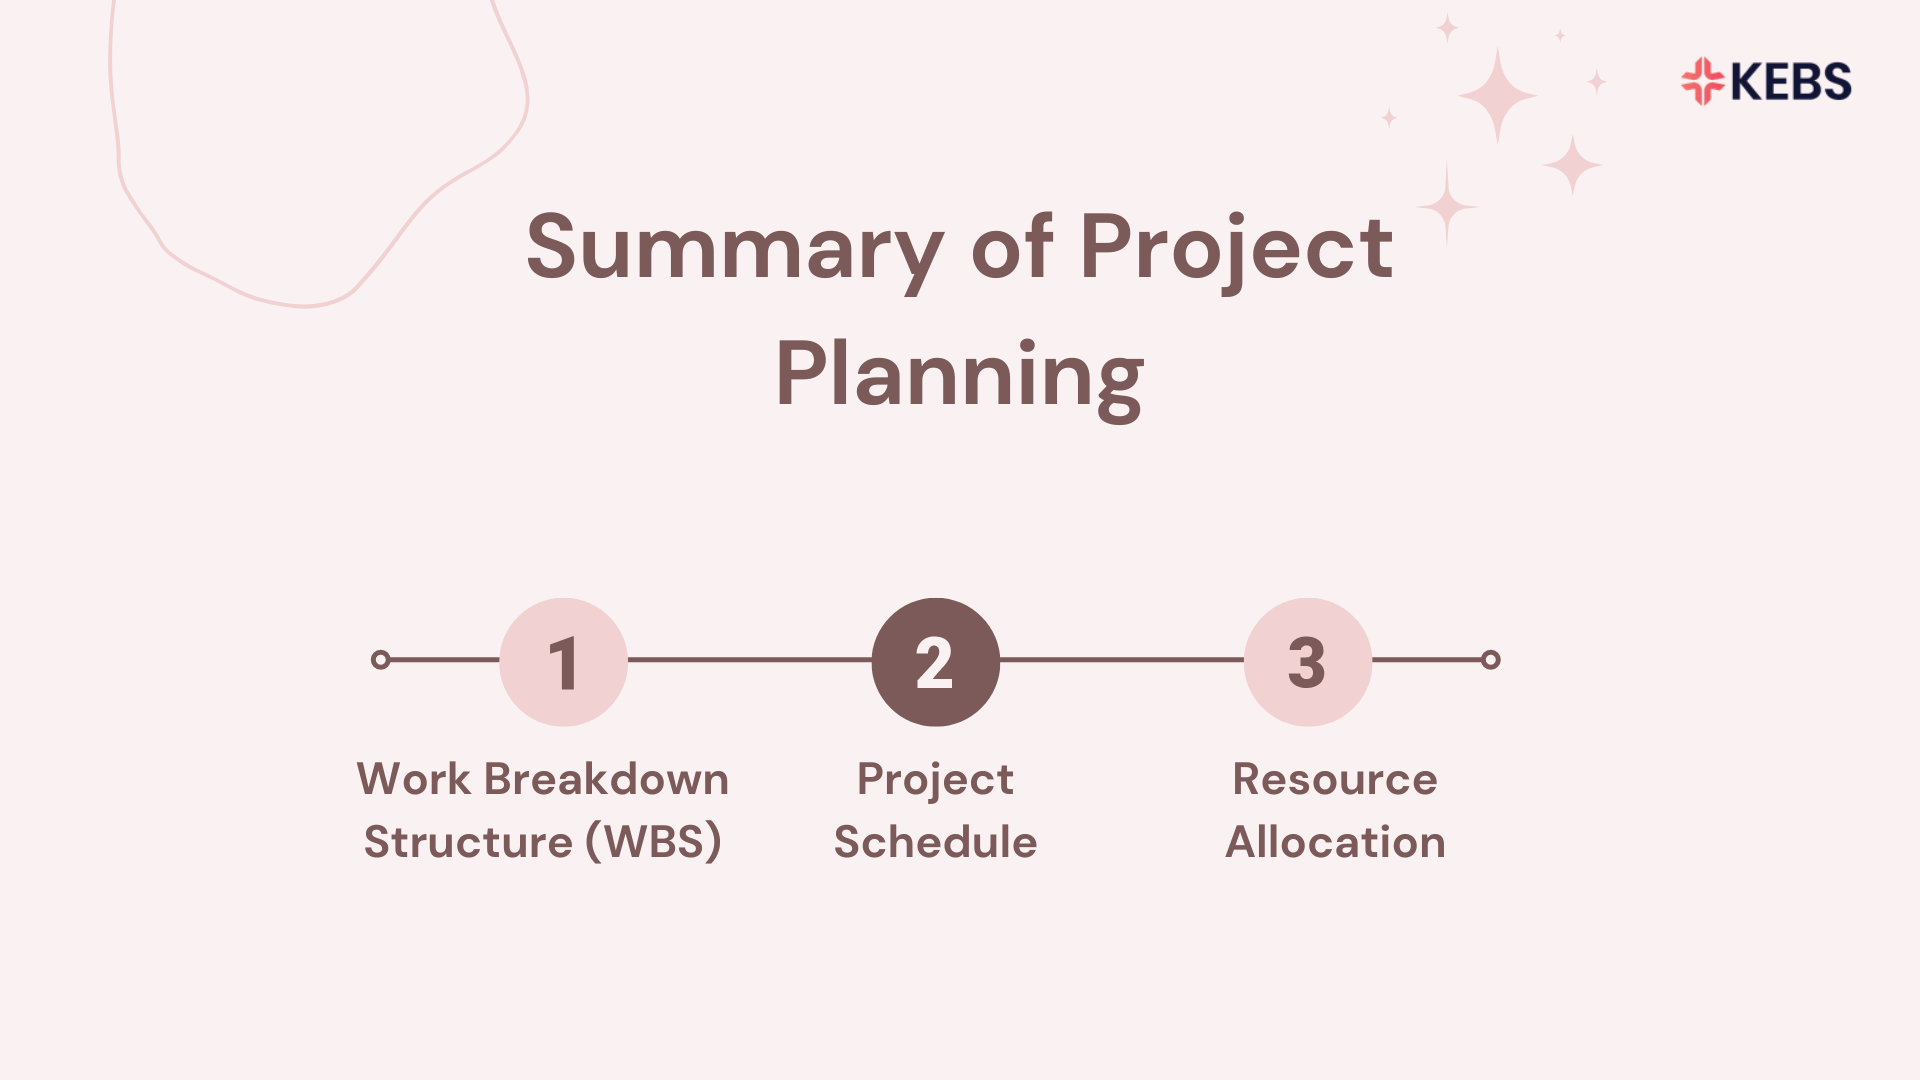 Summary of Project Planning